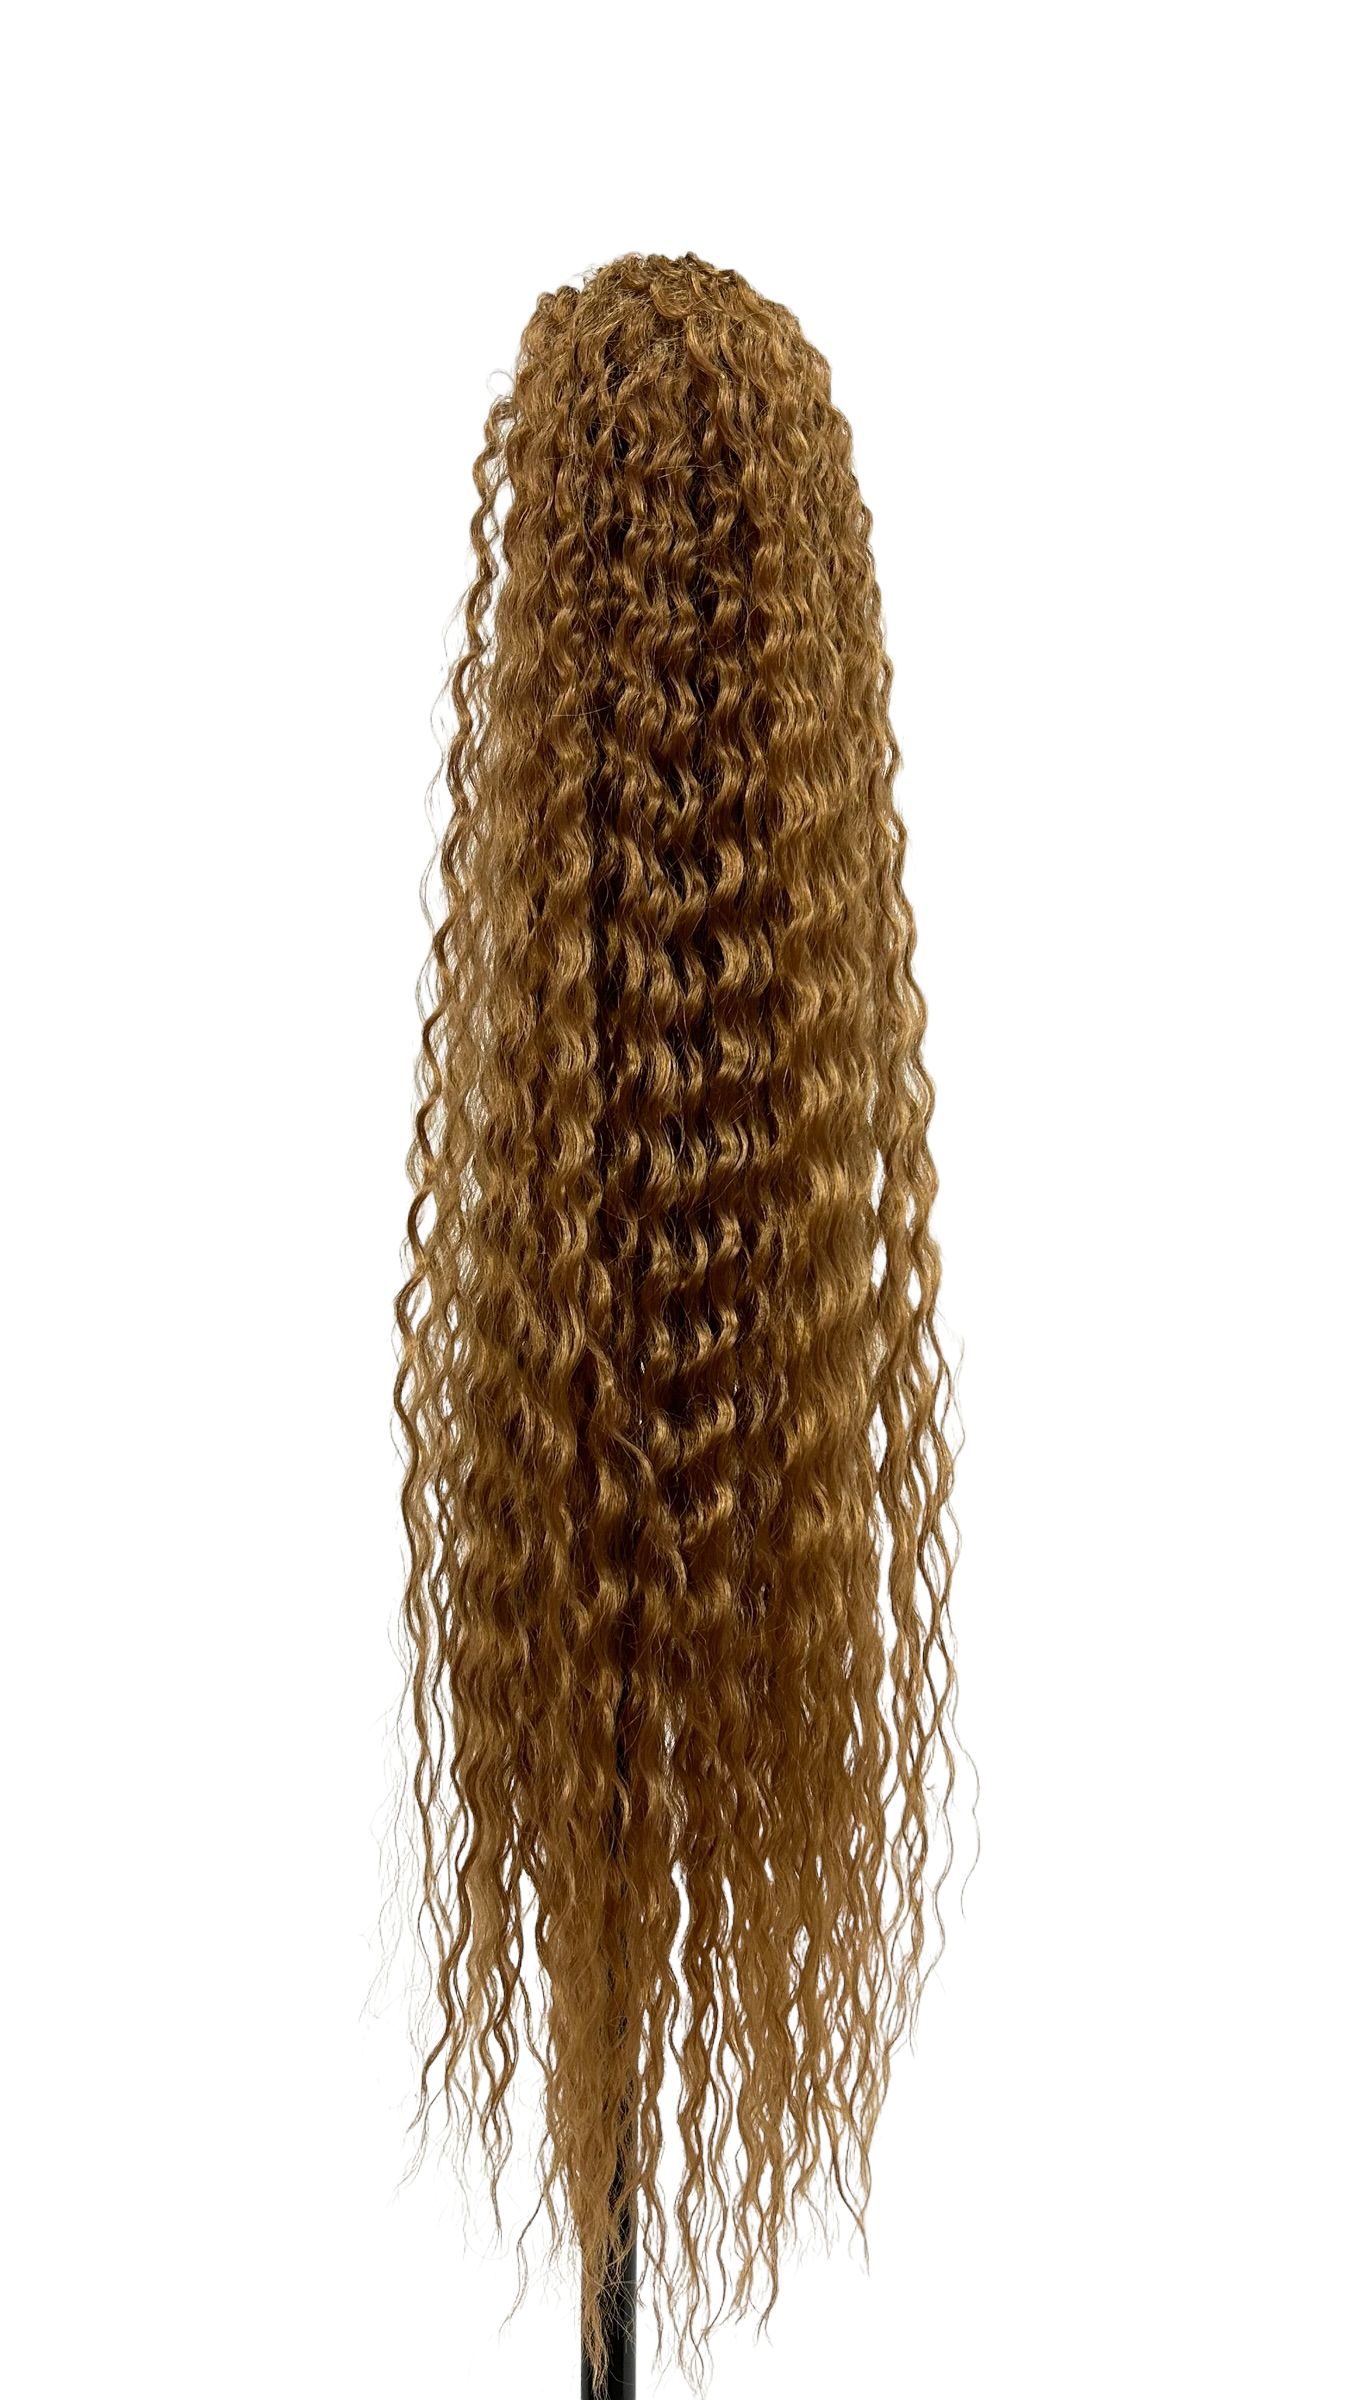 33 - Crimped Ponytail 30'' - 27 - DaizyKat Cosmetics 33 - Crimped Ponytail 30'' - 27 DaizyKat Cosmetics